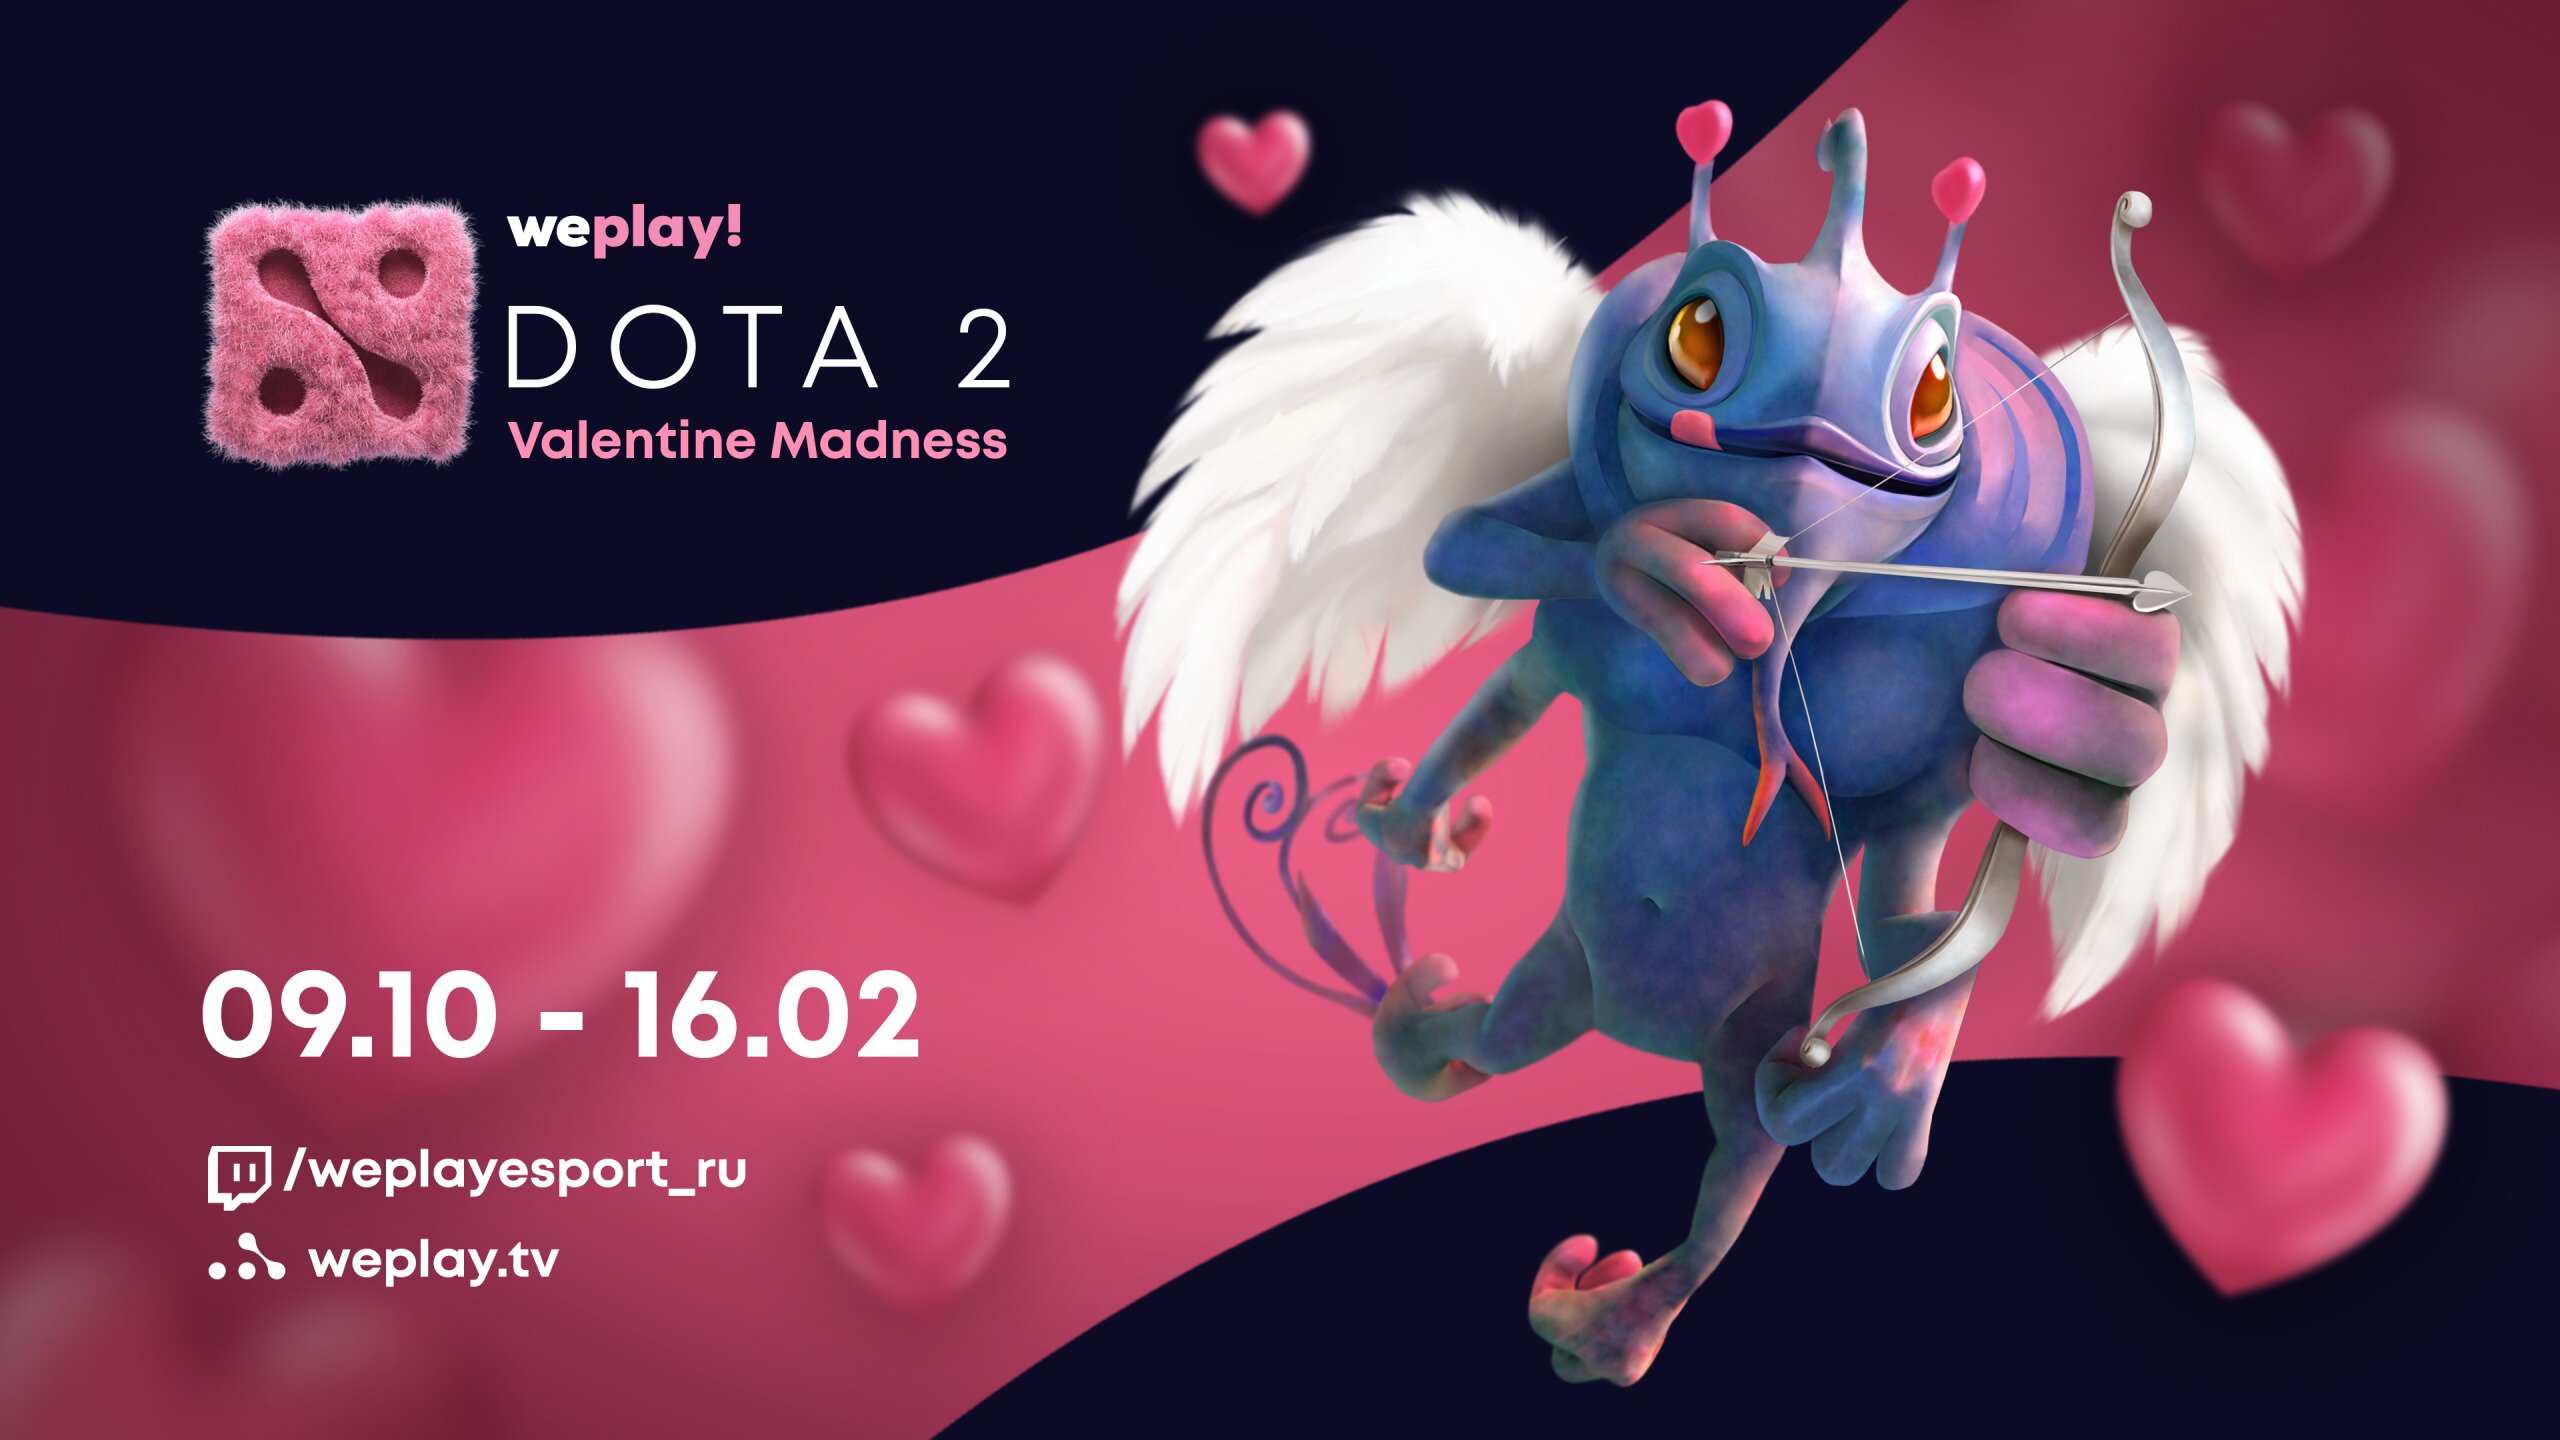 WePlay! aims Cupid’s bow at Dota 2 fans this week with their Valentine Madness tournament. How well will romance and Dota 2 mix?